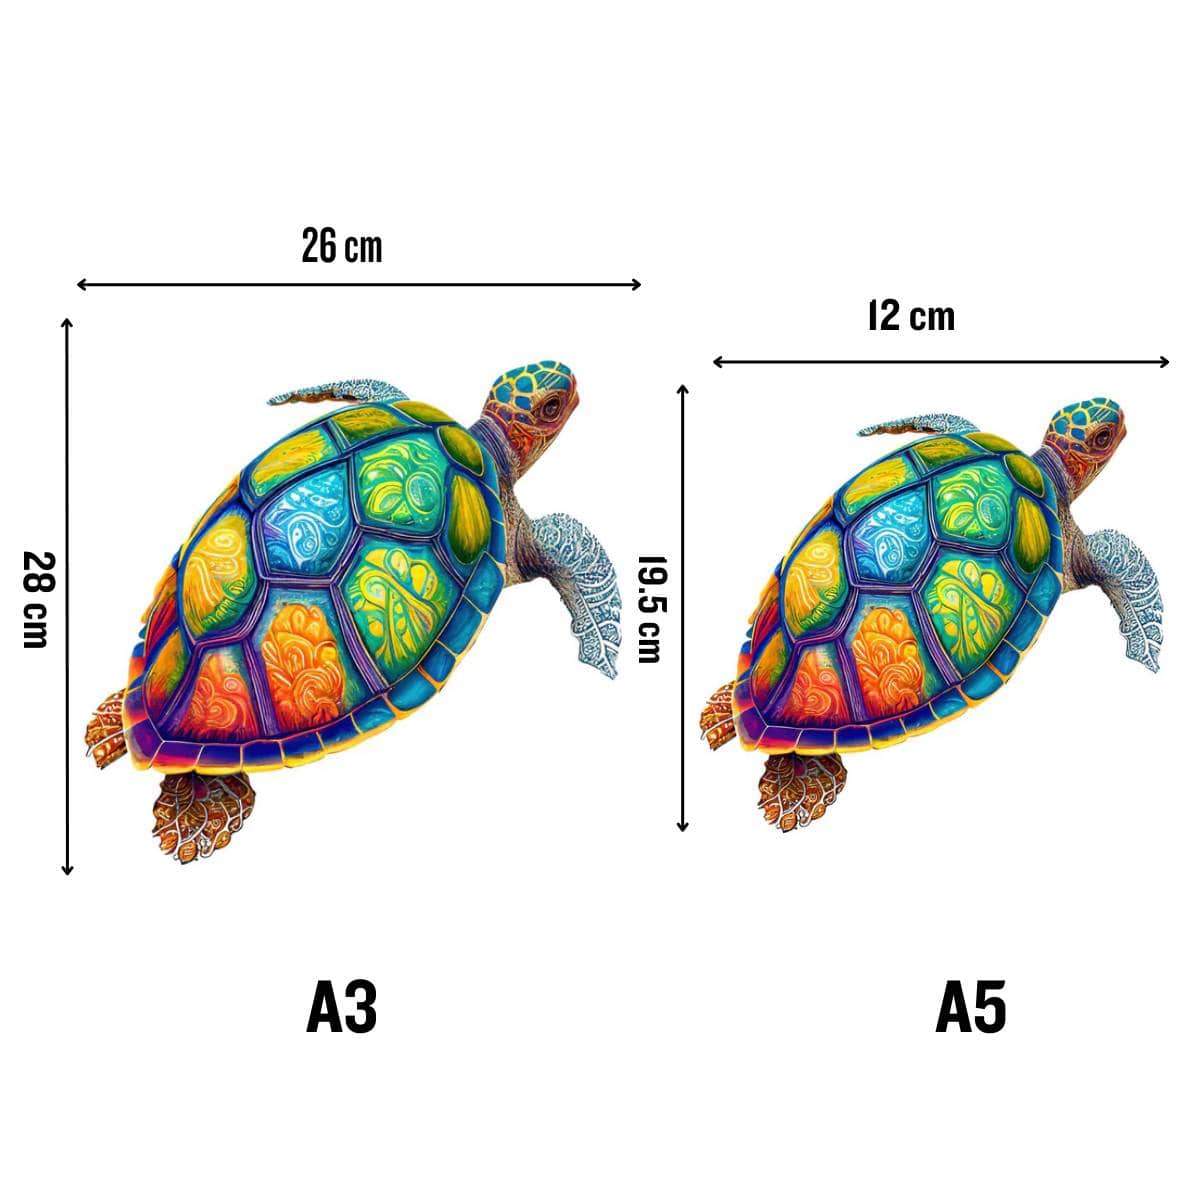 Animal Jigsaw Puzzle > Wooden Jigsaw Puzzle > Jigsaw Puzzle Colorful Turtle - Jigsaw Puzzle